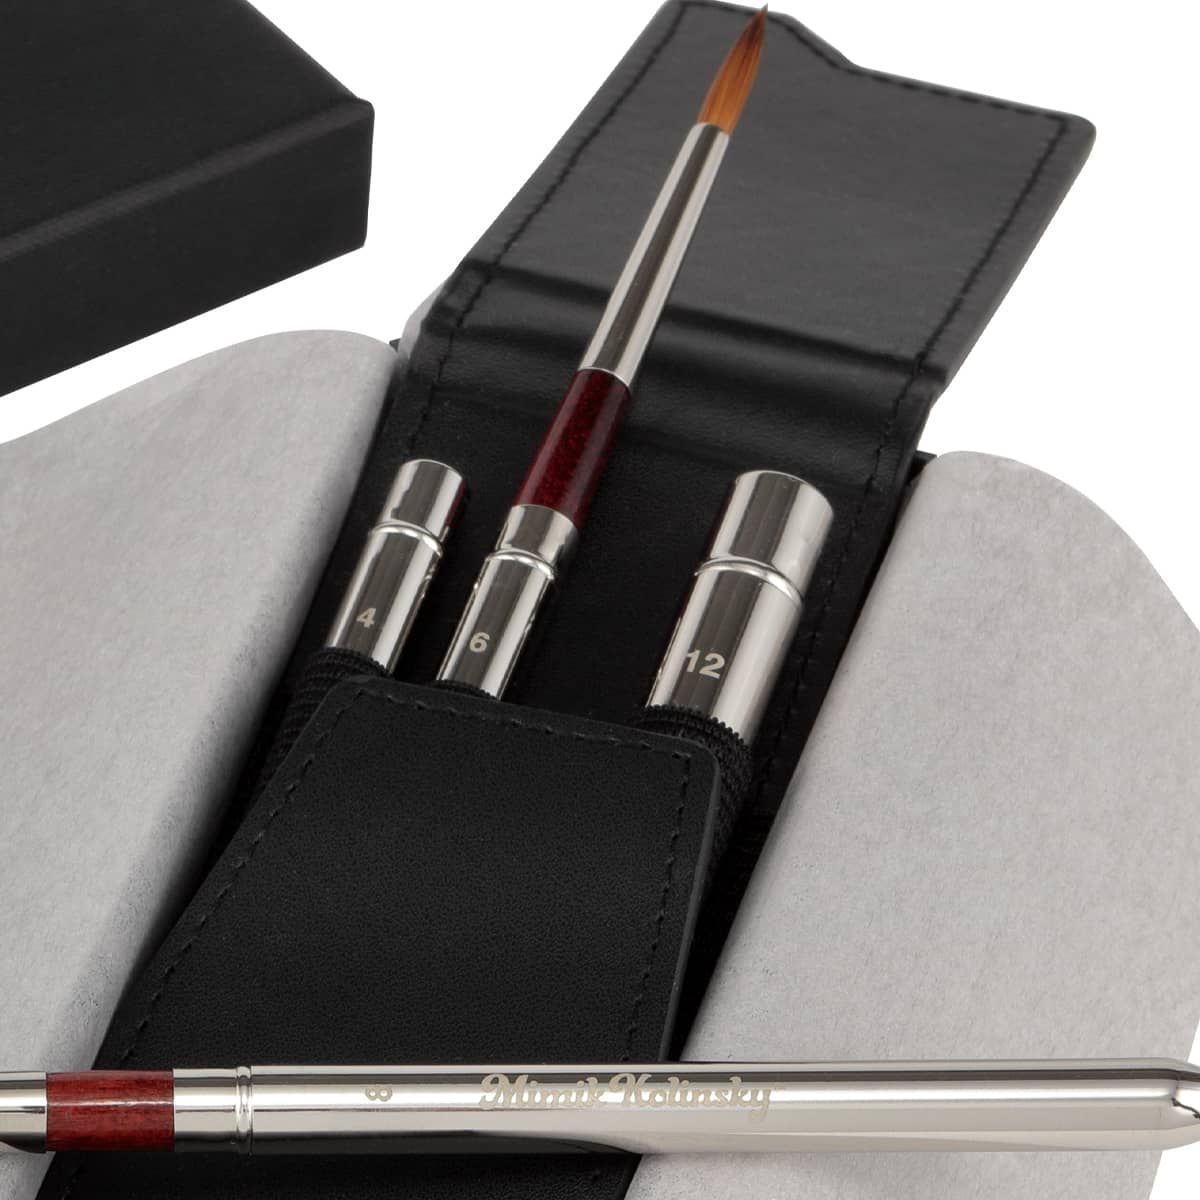 Weighted ferrule provides balance, Smooth leatherette case with magnetic closure